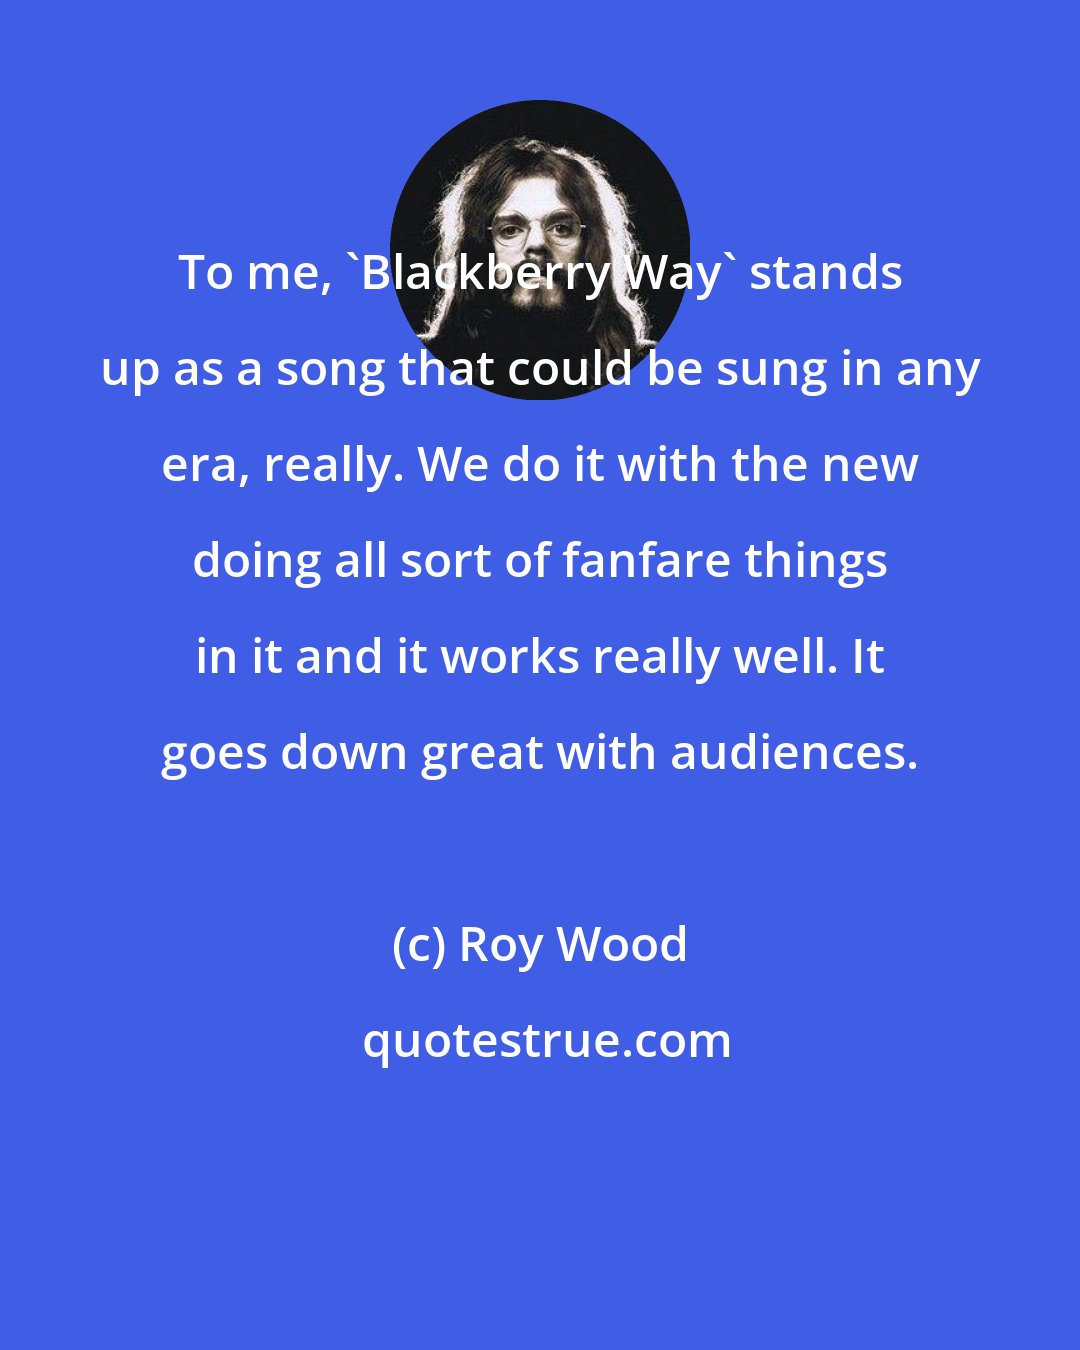 Roy Wood: To me, 'Blackberry Way' stands up as a song that could be sung in any era, really. We do it with the new doing all sort of fanfare things in it and it works really well. It goes down great with audiences.